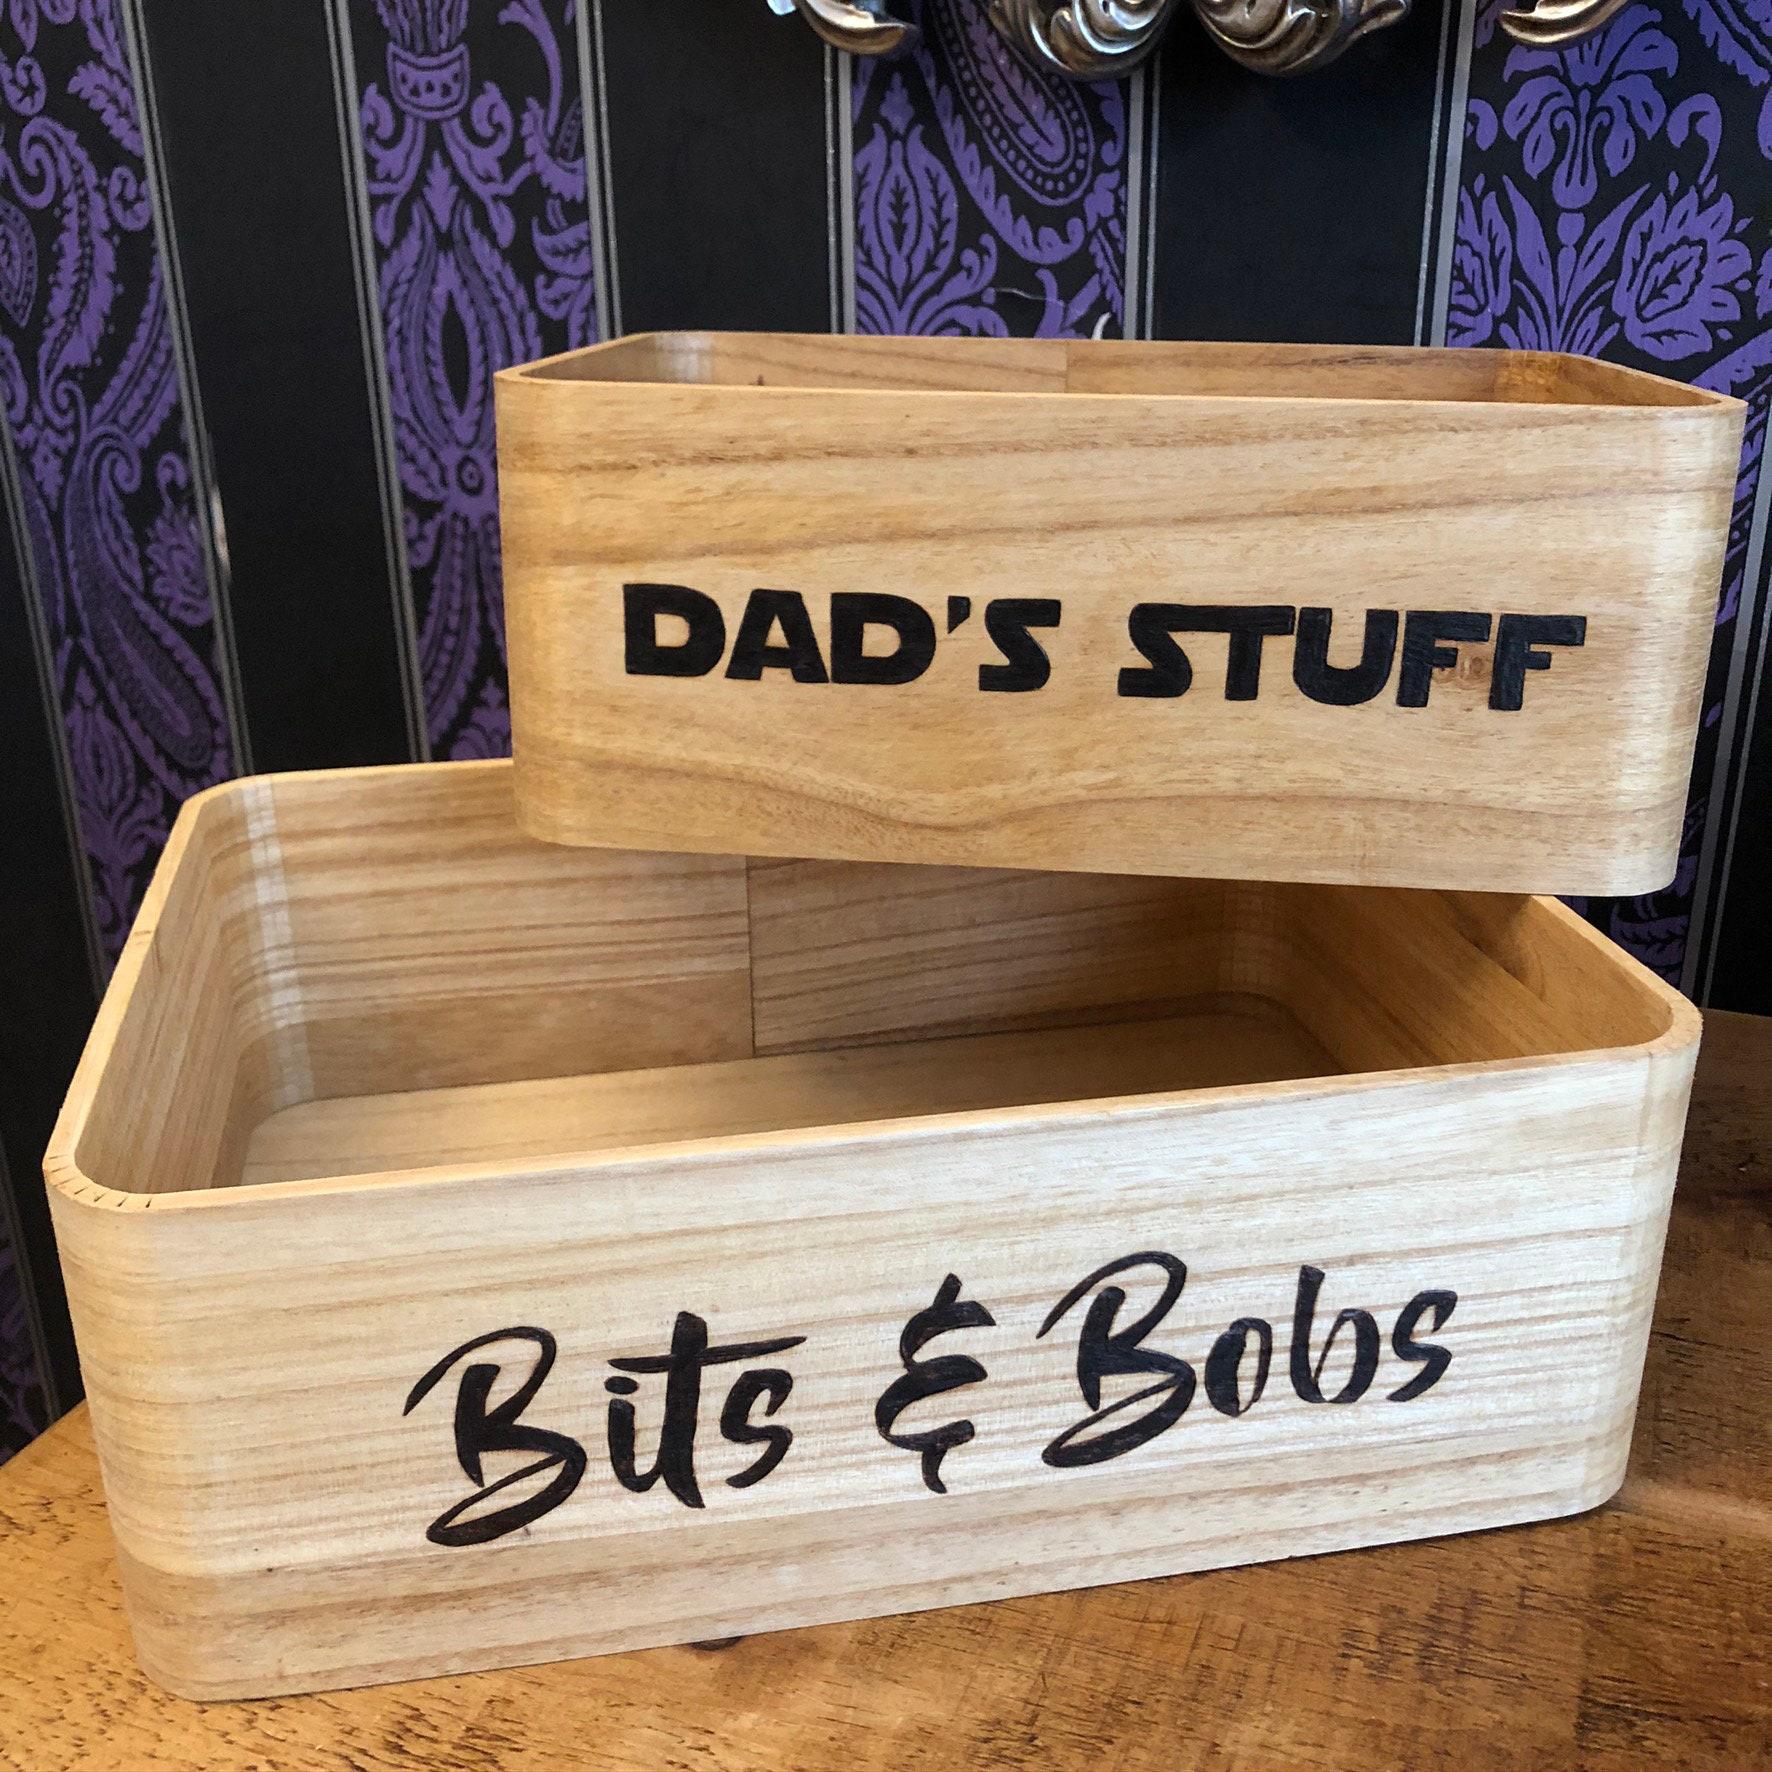 Two wooden storage boxes